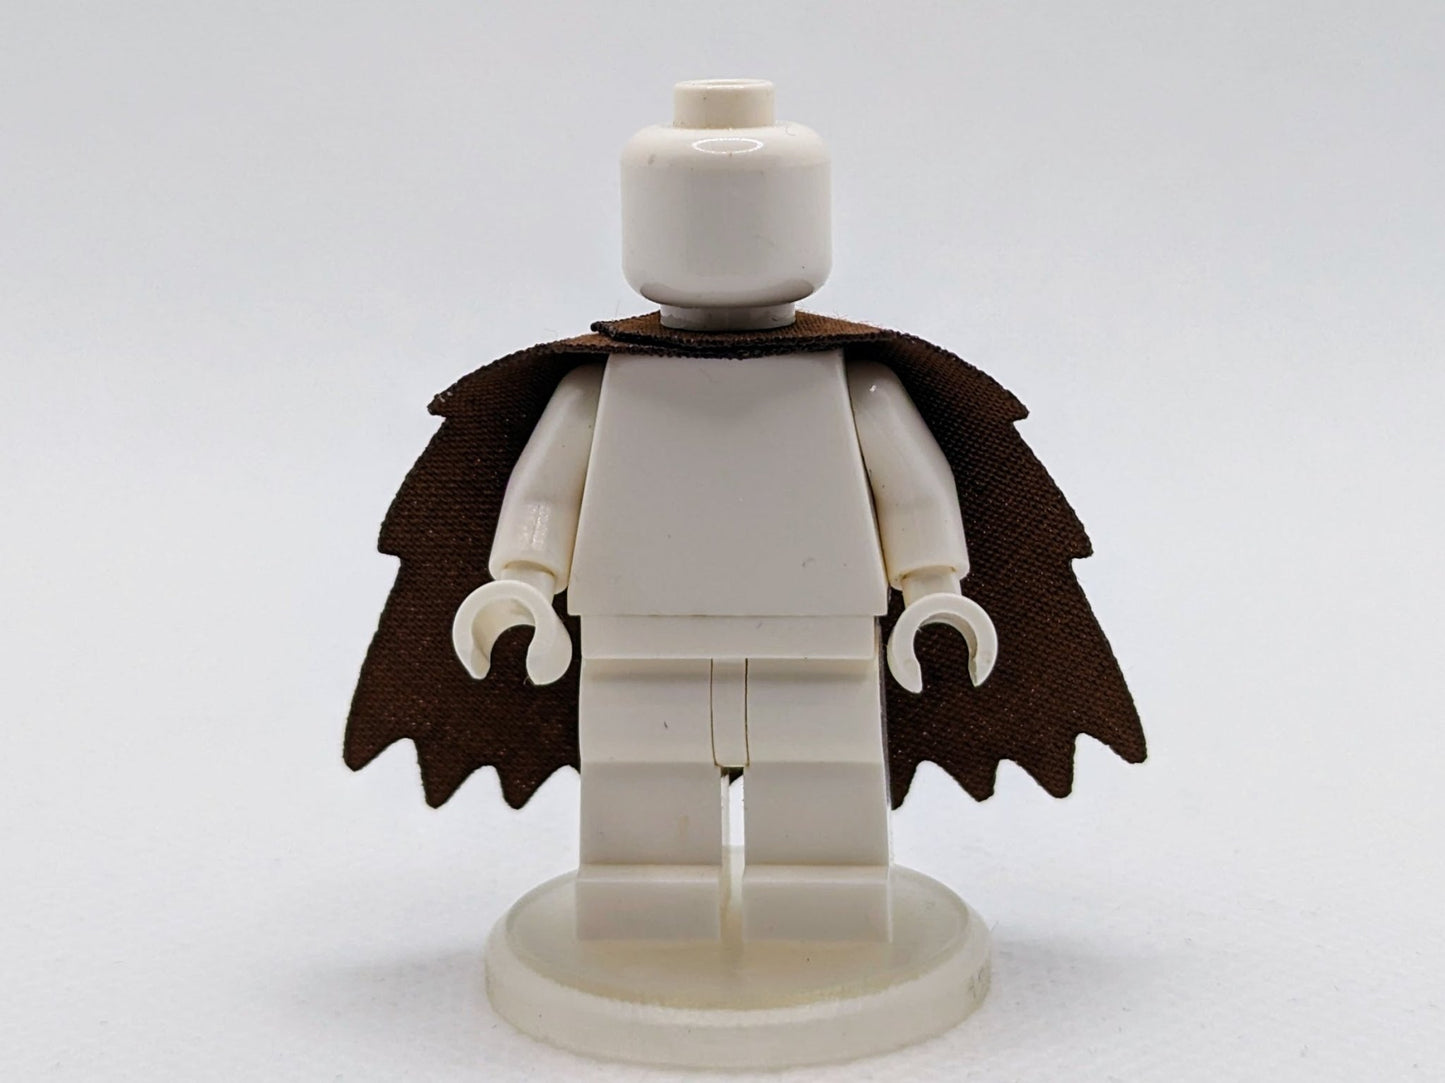 Jagged Cape by capes4minifigs - RPGminifigs